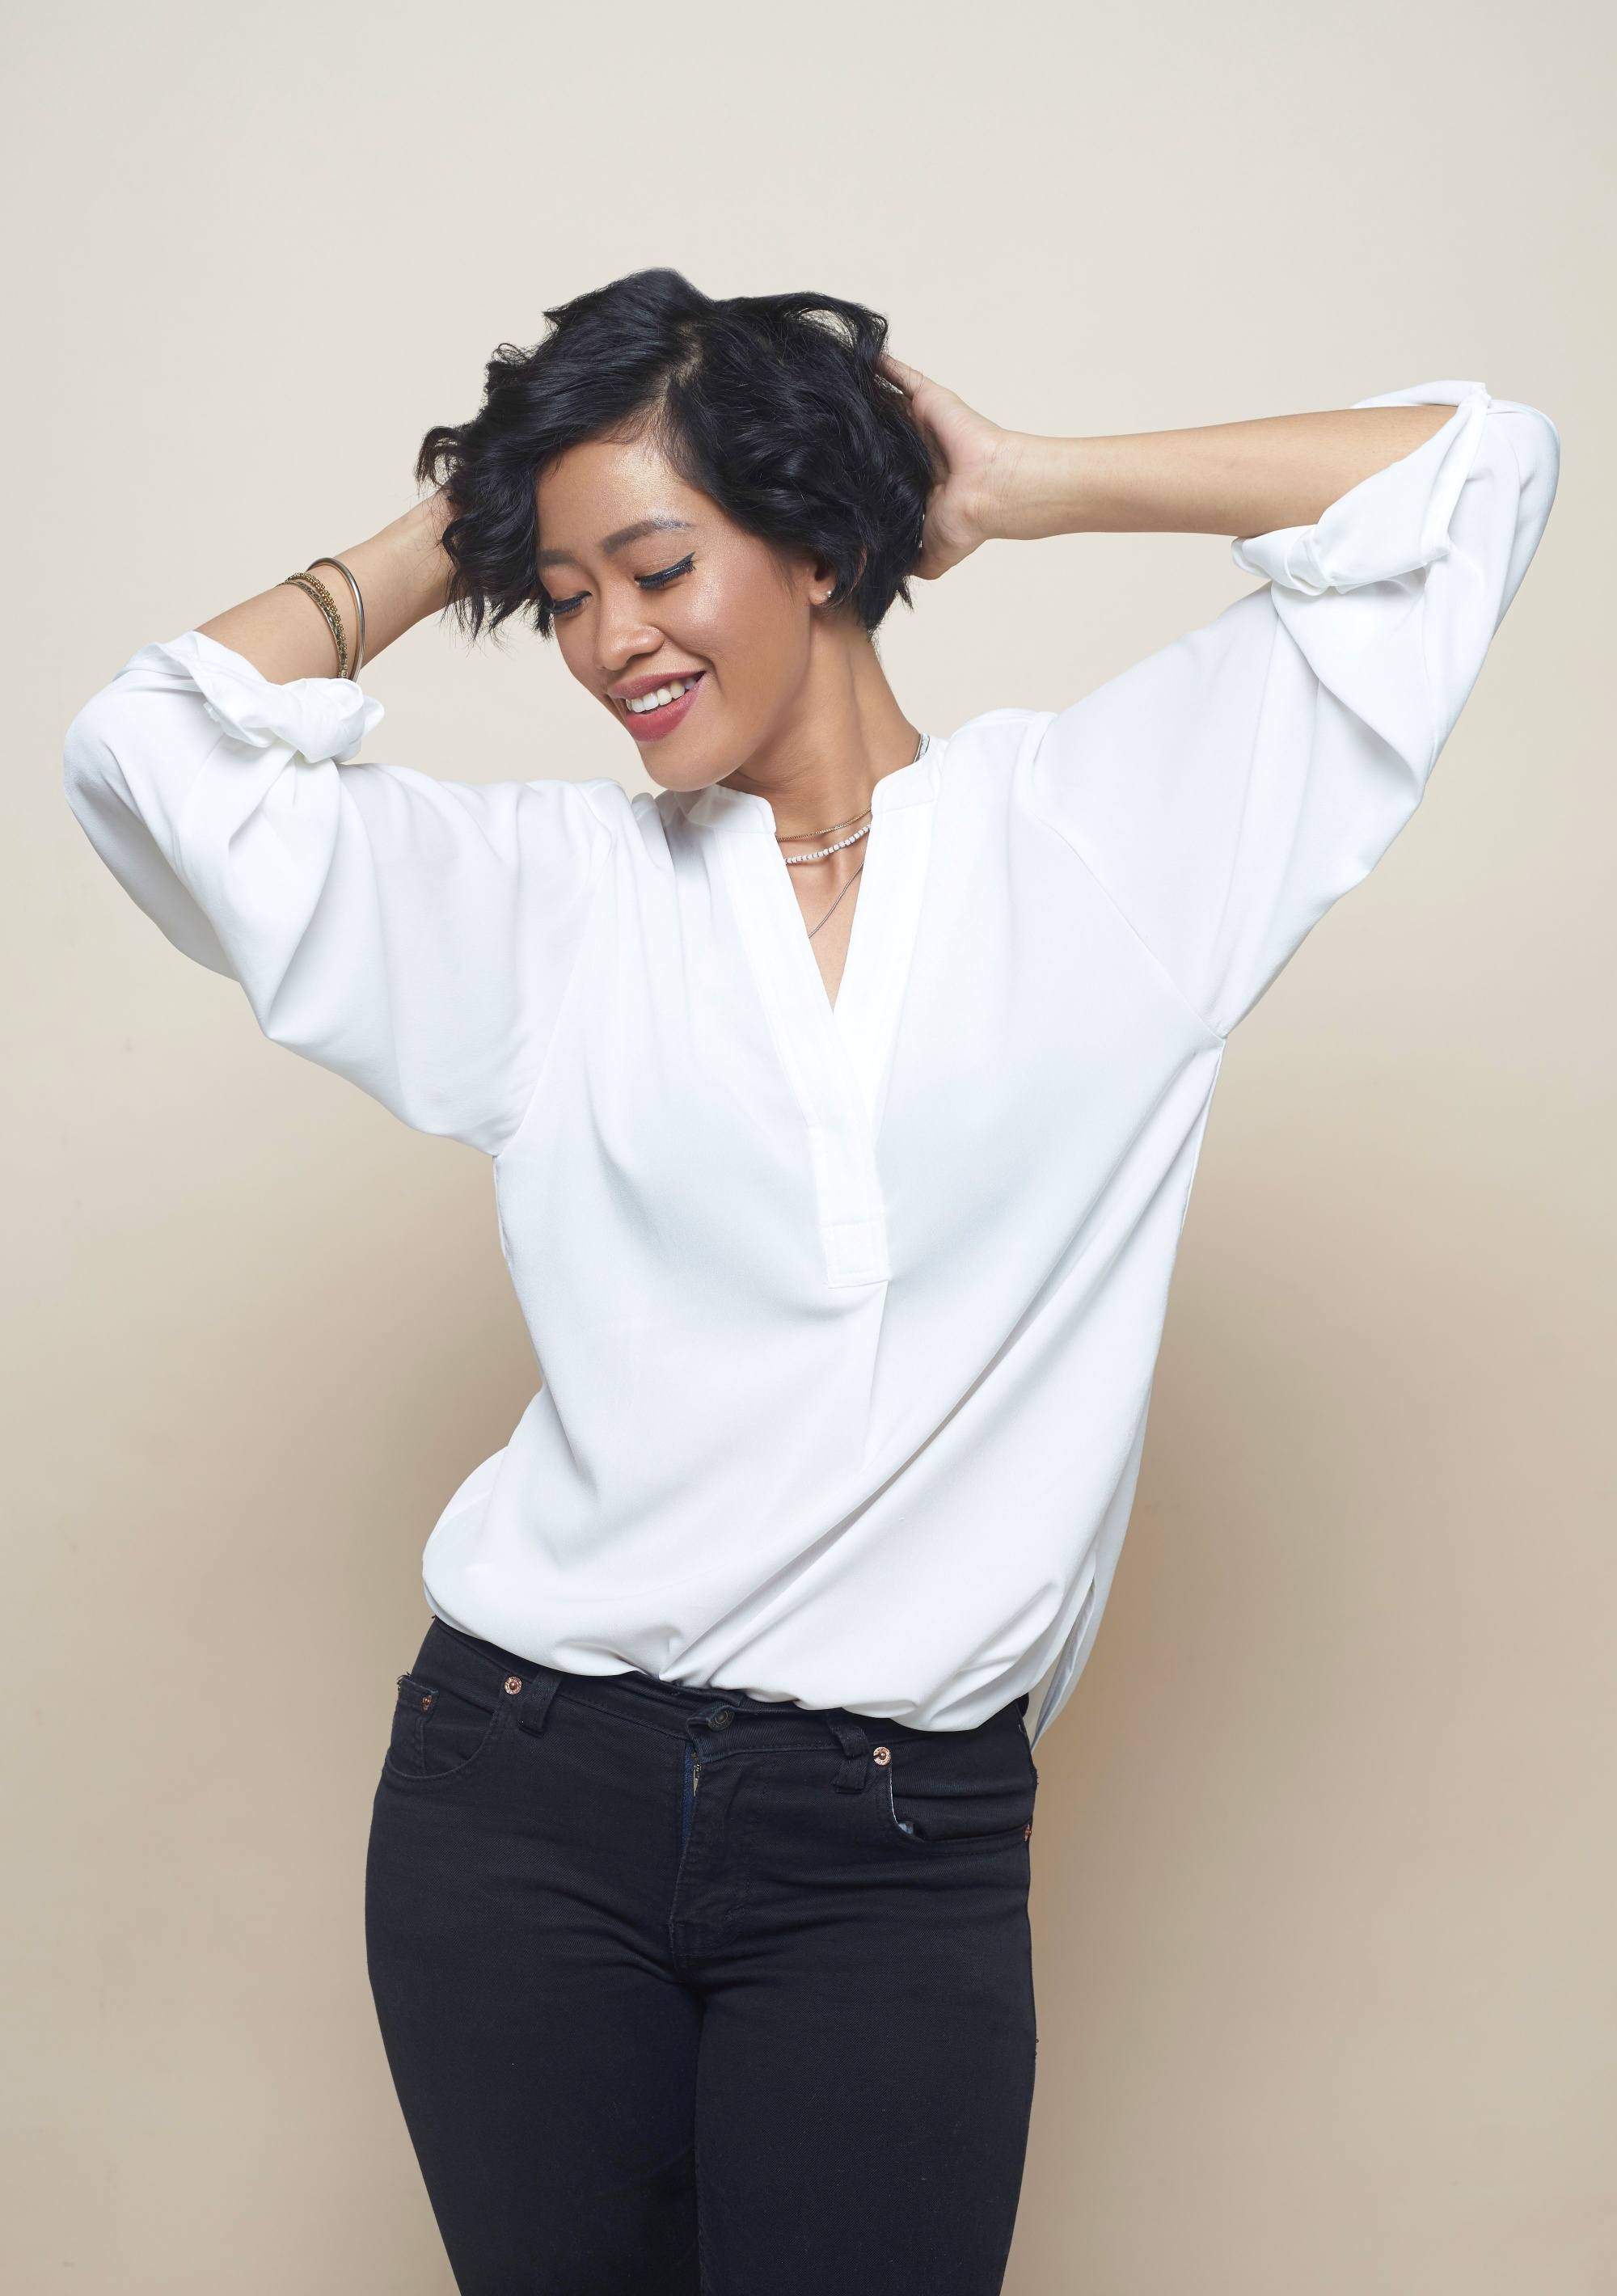 Haircuts for curly hair: Asian woman with curly short hair wearing a white blouse and black pants